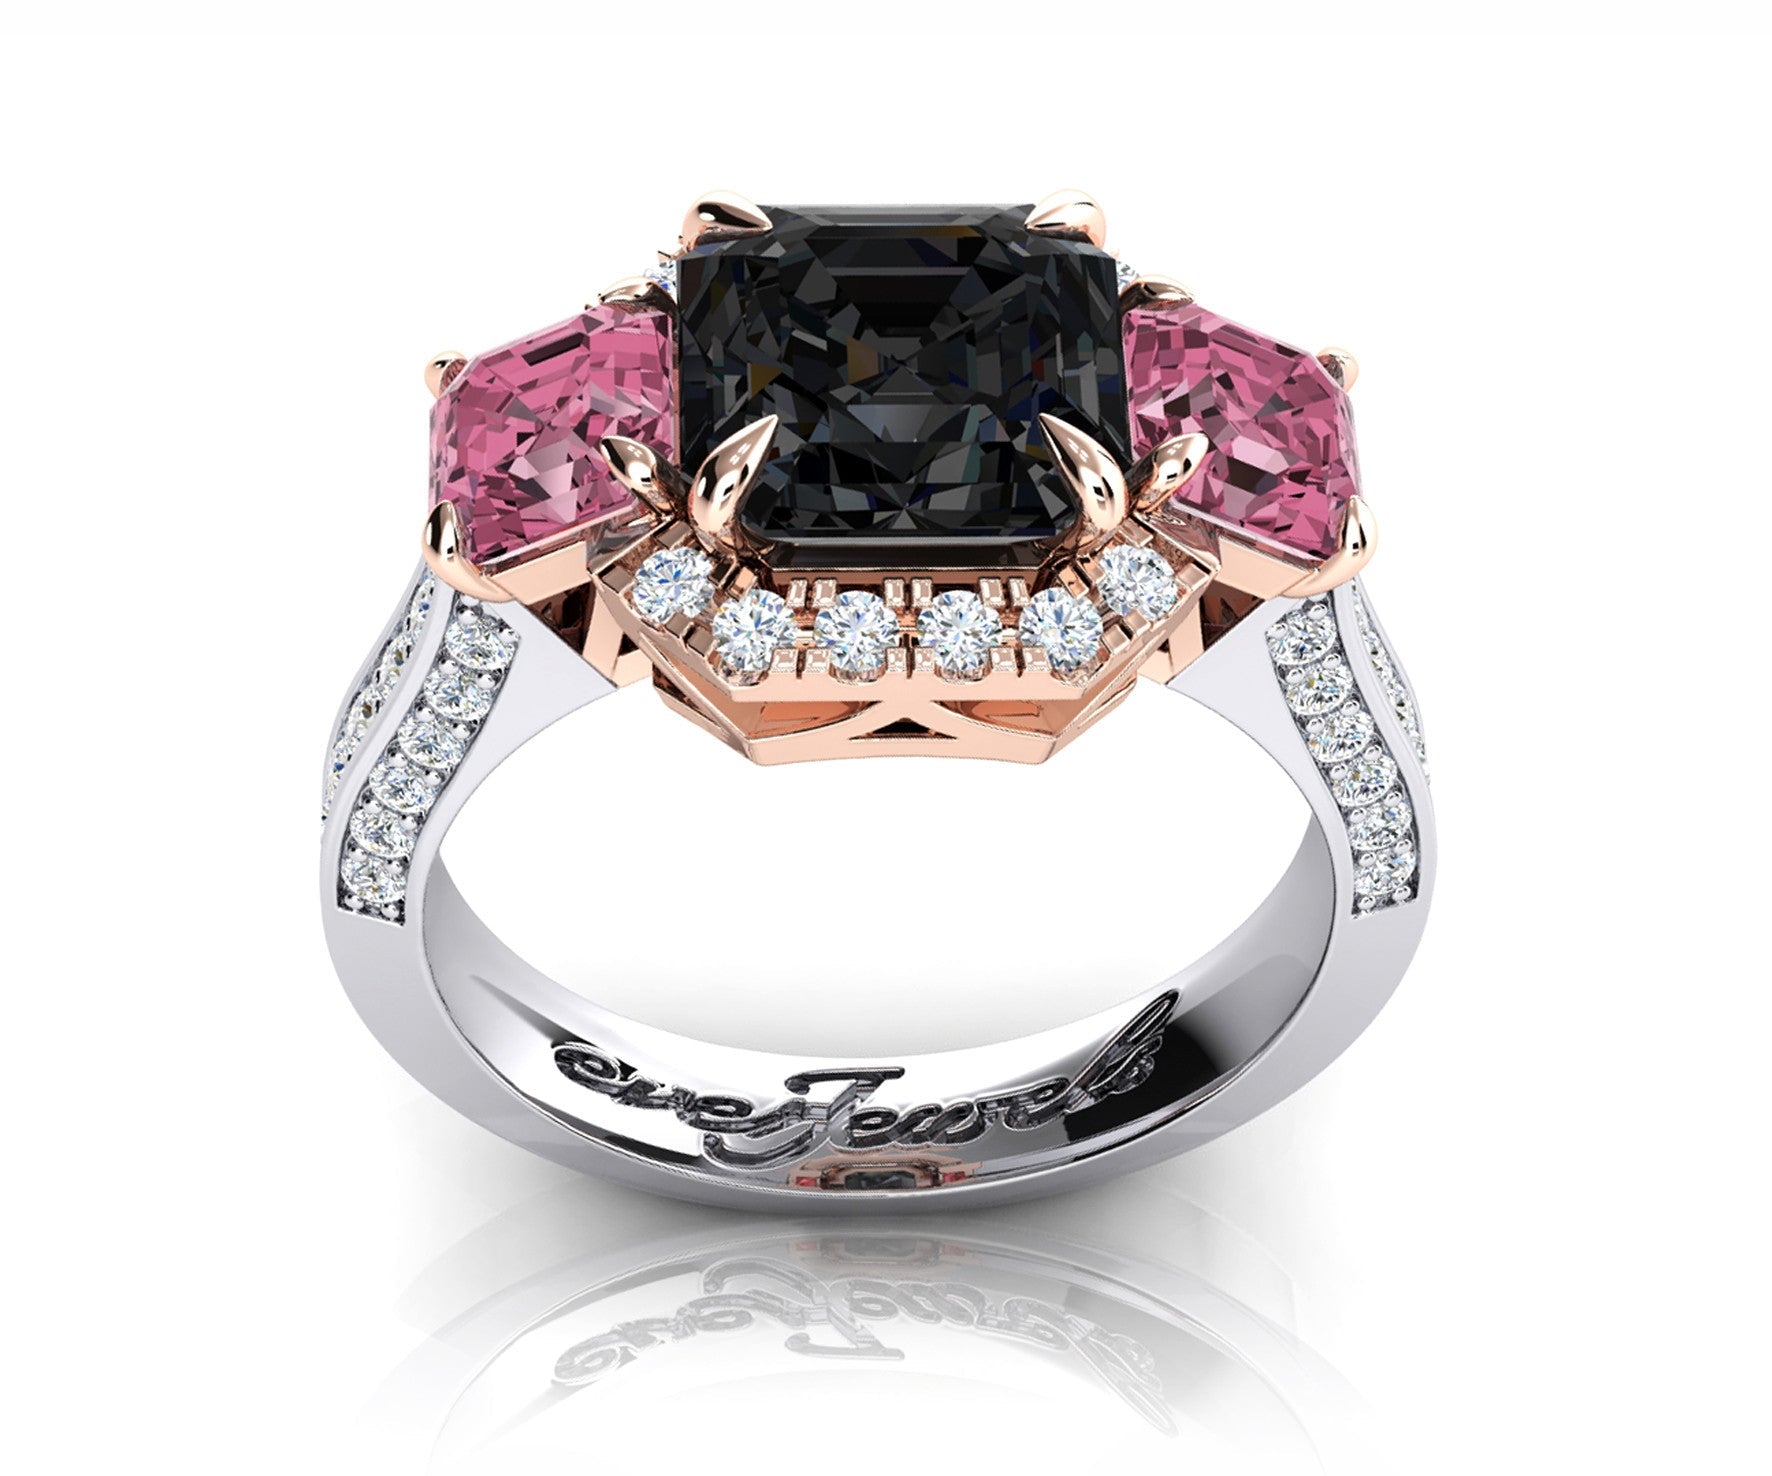 18ct White and rose gold pink and grey spinel Diamond dress ring - ForeverJewels Design Studio 8